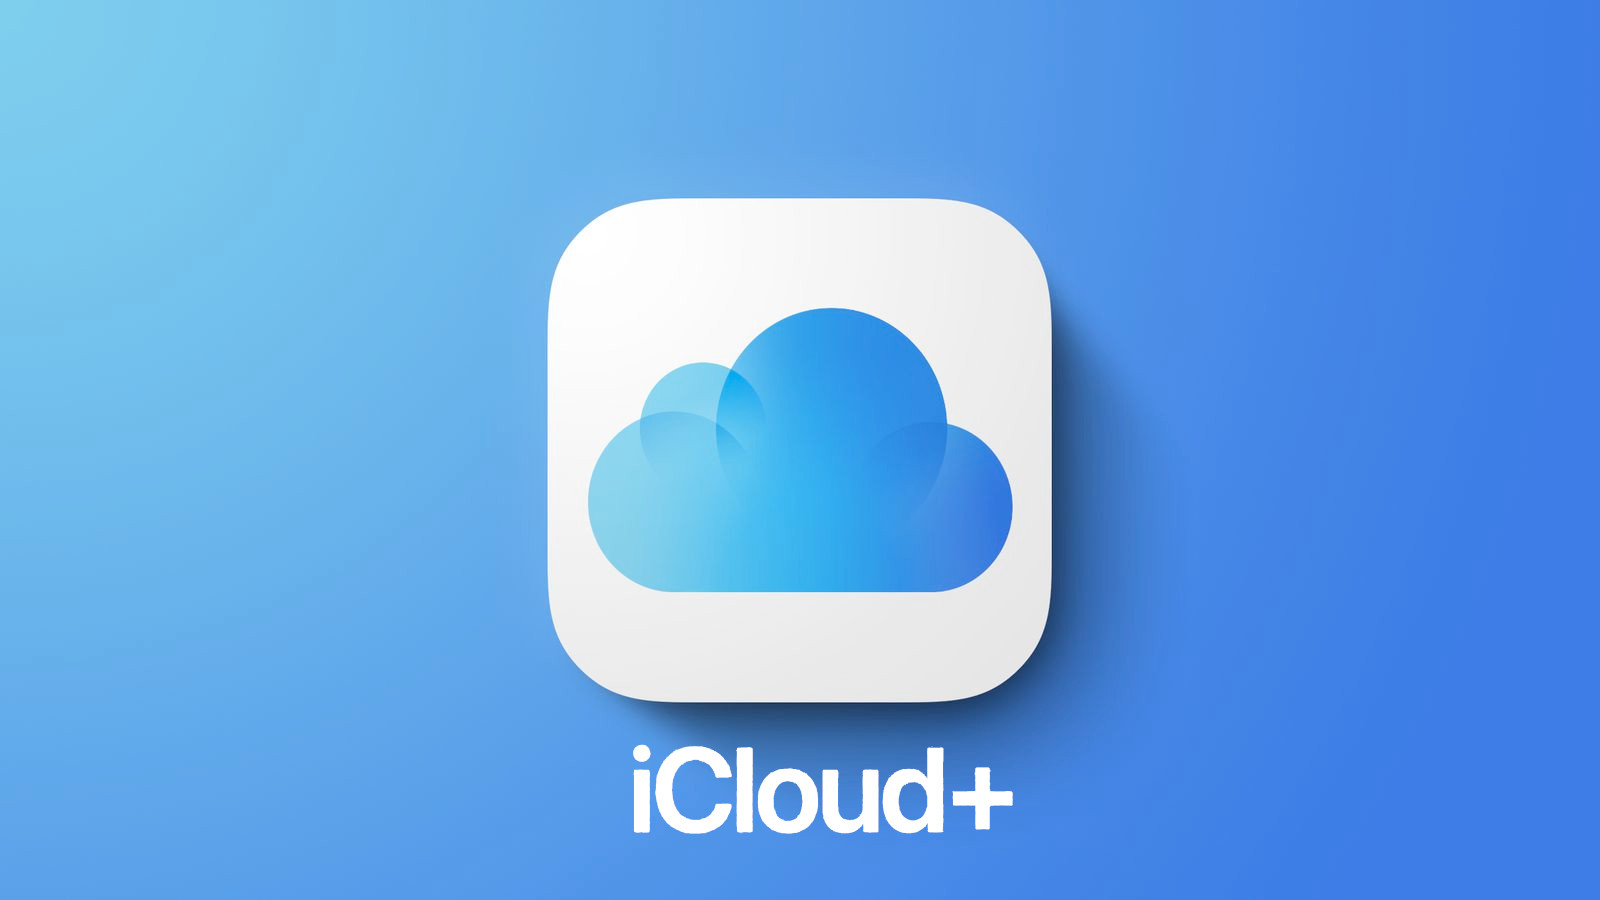 iCloud+ 50GB - 3 Months Trial Subscription US (ONLY FOR NEW ACCOUNTS) 0.31 usd